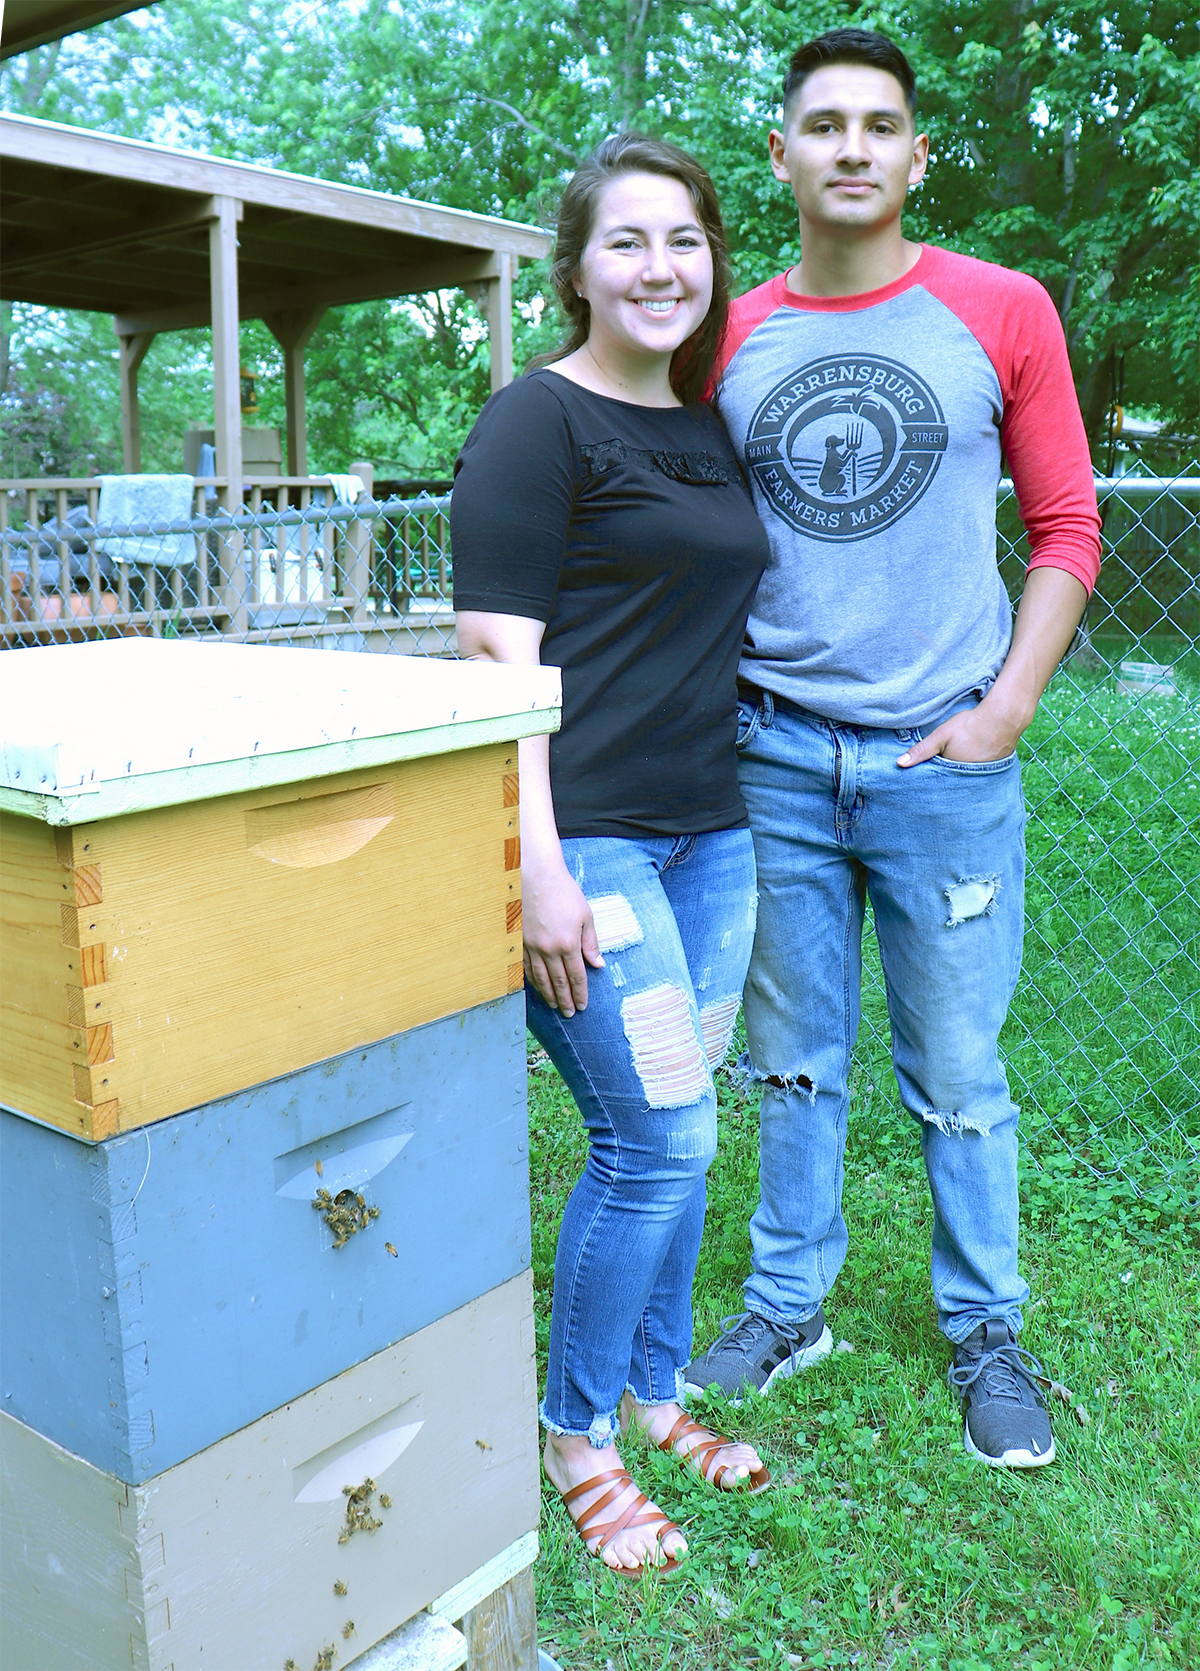 Senior Airman Santiago Valdez and his wife, Julie, are polishing their beekeeping skills in MU Extension’s Heroes to Hives program, which teaches veterans and their families about beekeeping. The couple’s backyard hive provides honey and beeswax for their